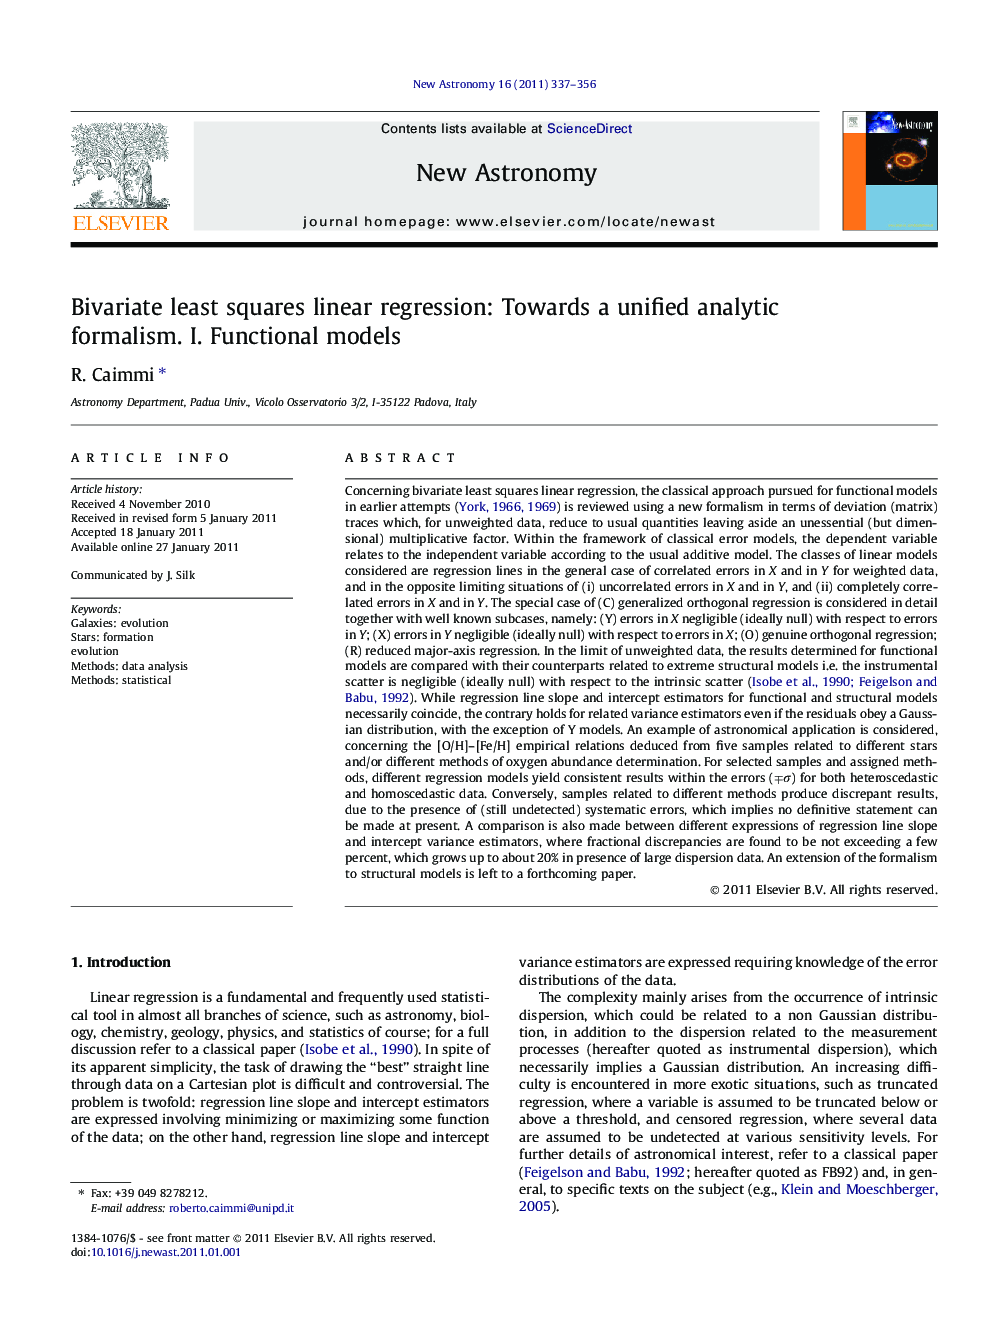 Bivariate least squares linear regression: Towards a unified analytic formalism. I. Functional models